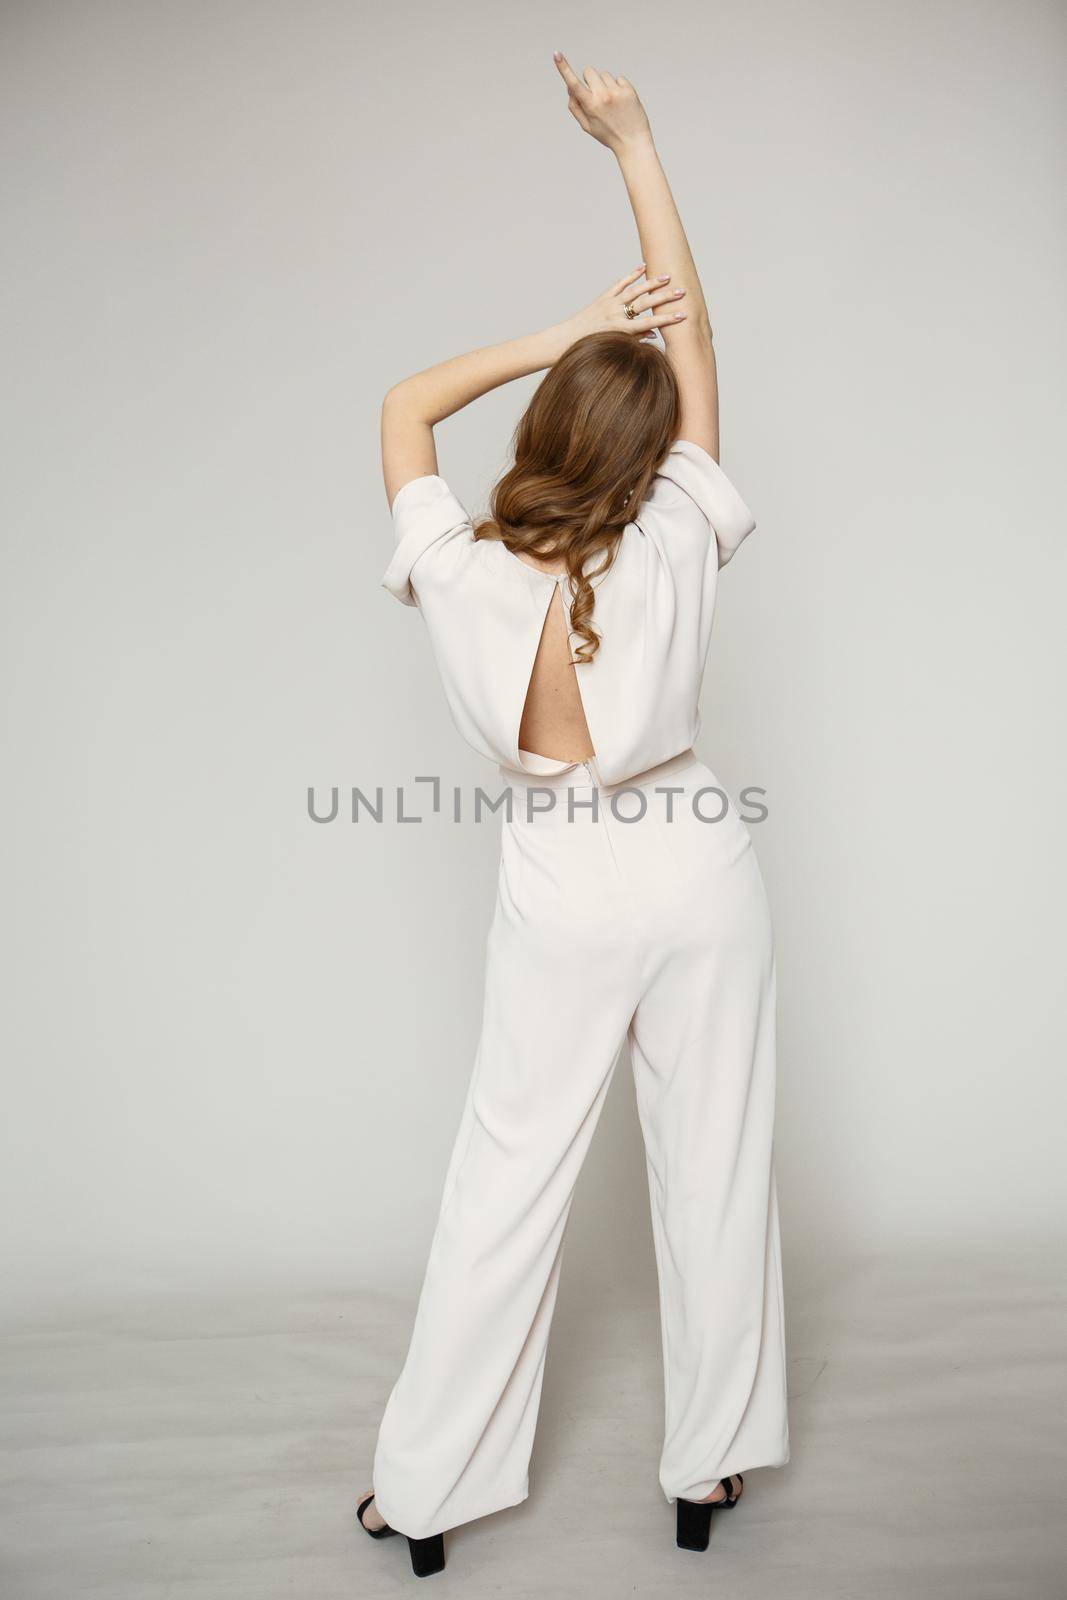 A model in a brown dress suit on a studio background. Shooting fashion clothes by deandy